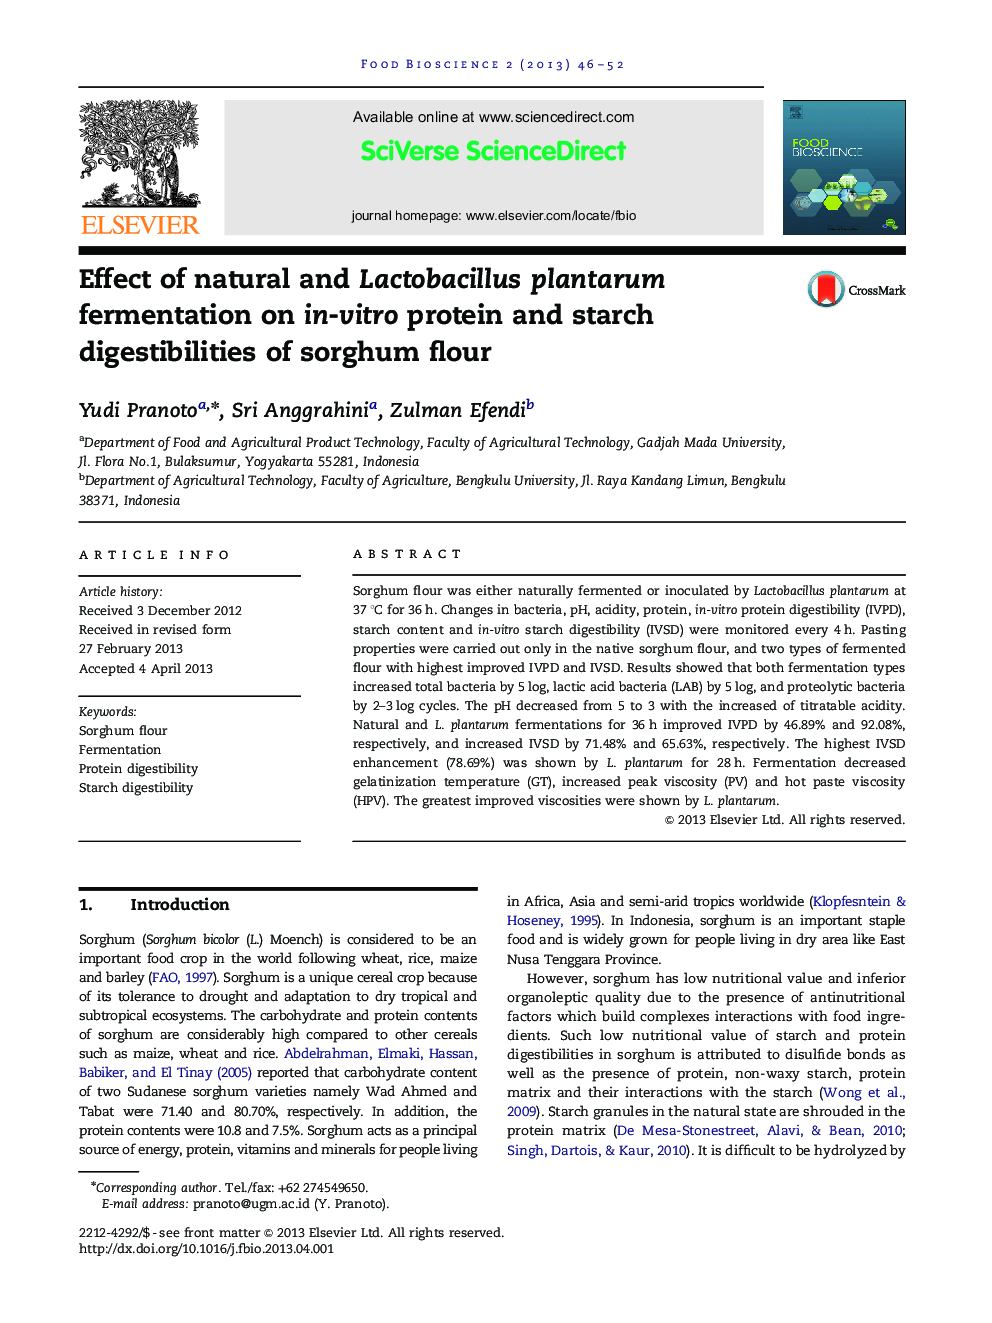 Effect of natural and Lactobacillus plantarum fermentation on in-vitro protein and starch digestibilities of sorghum flour